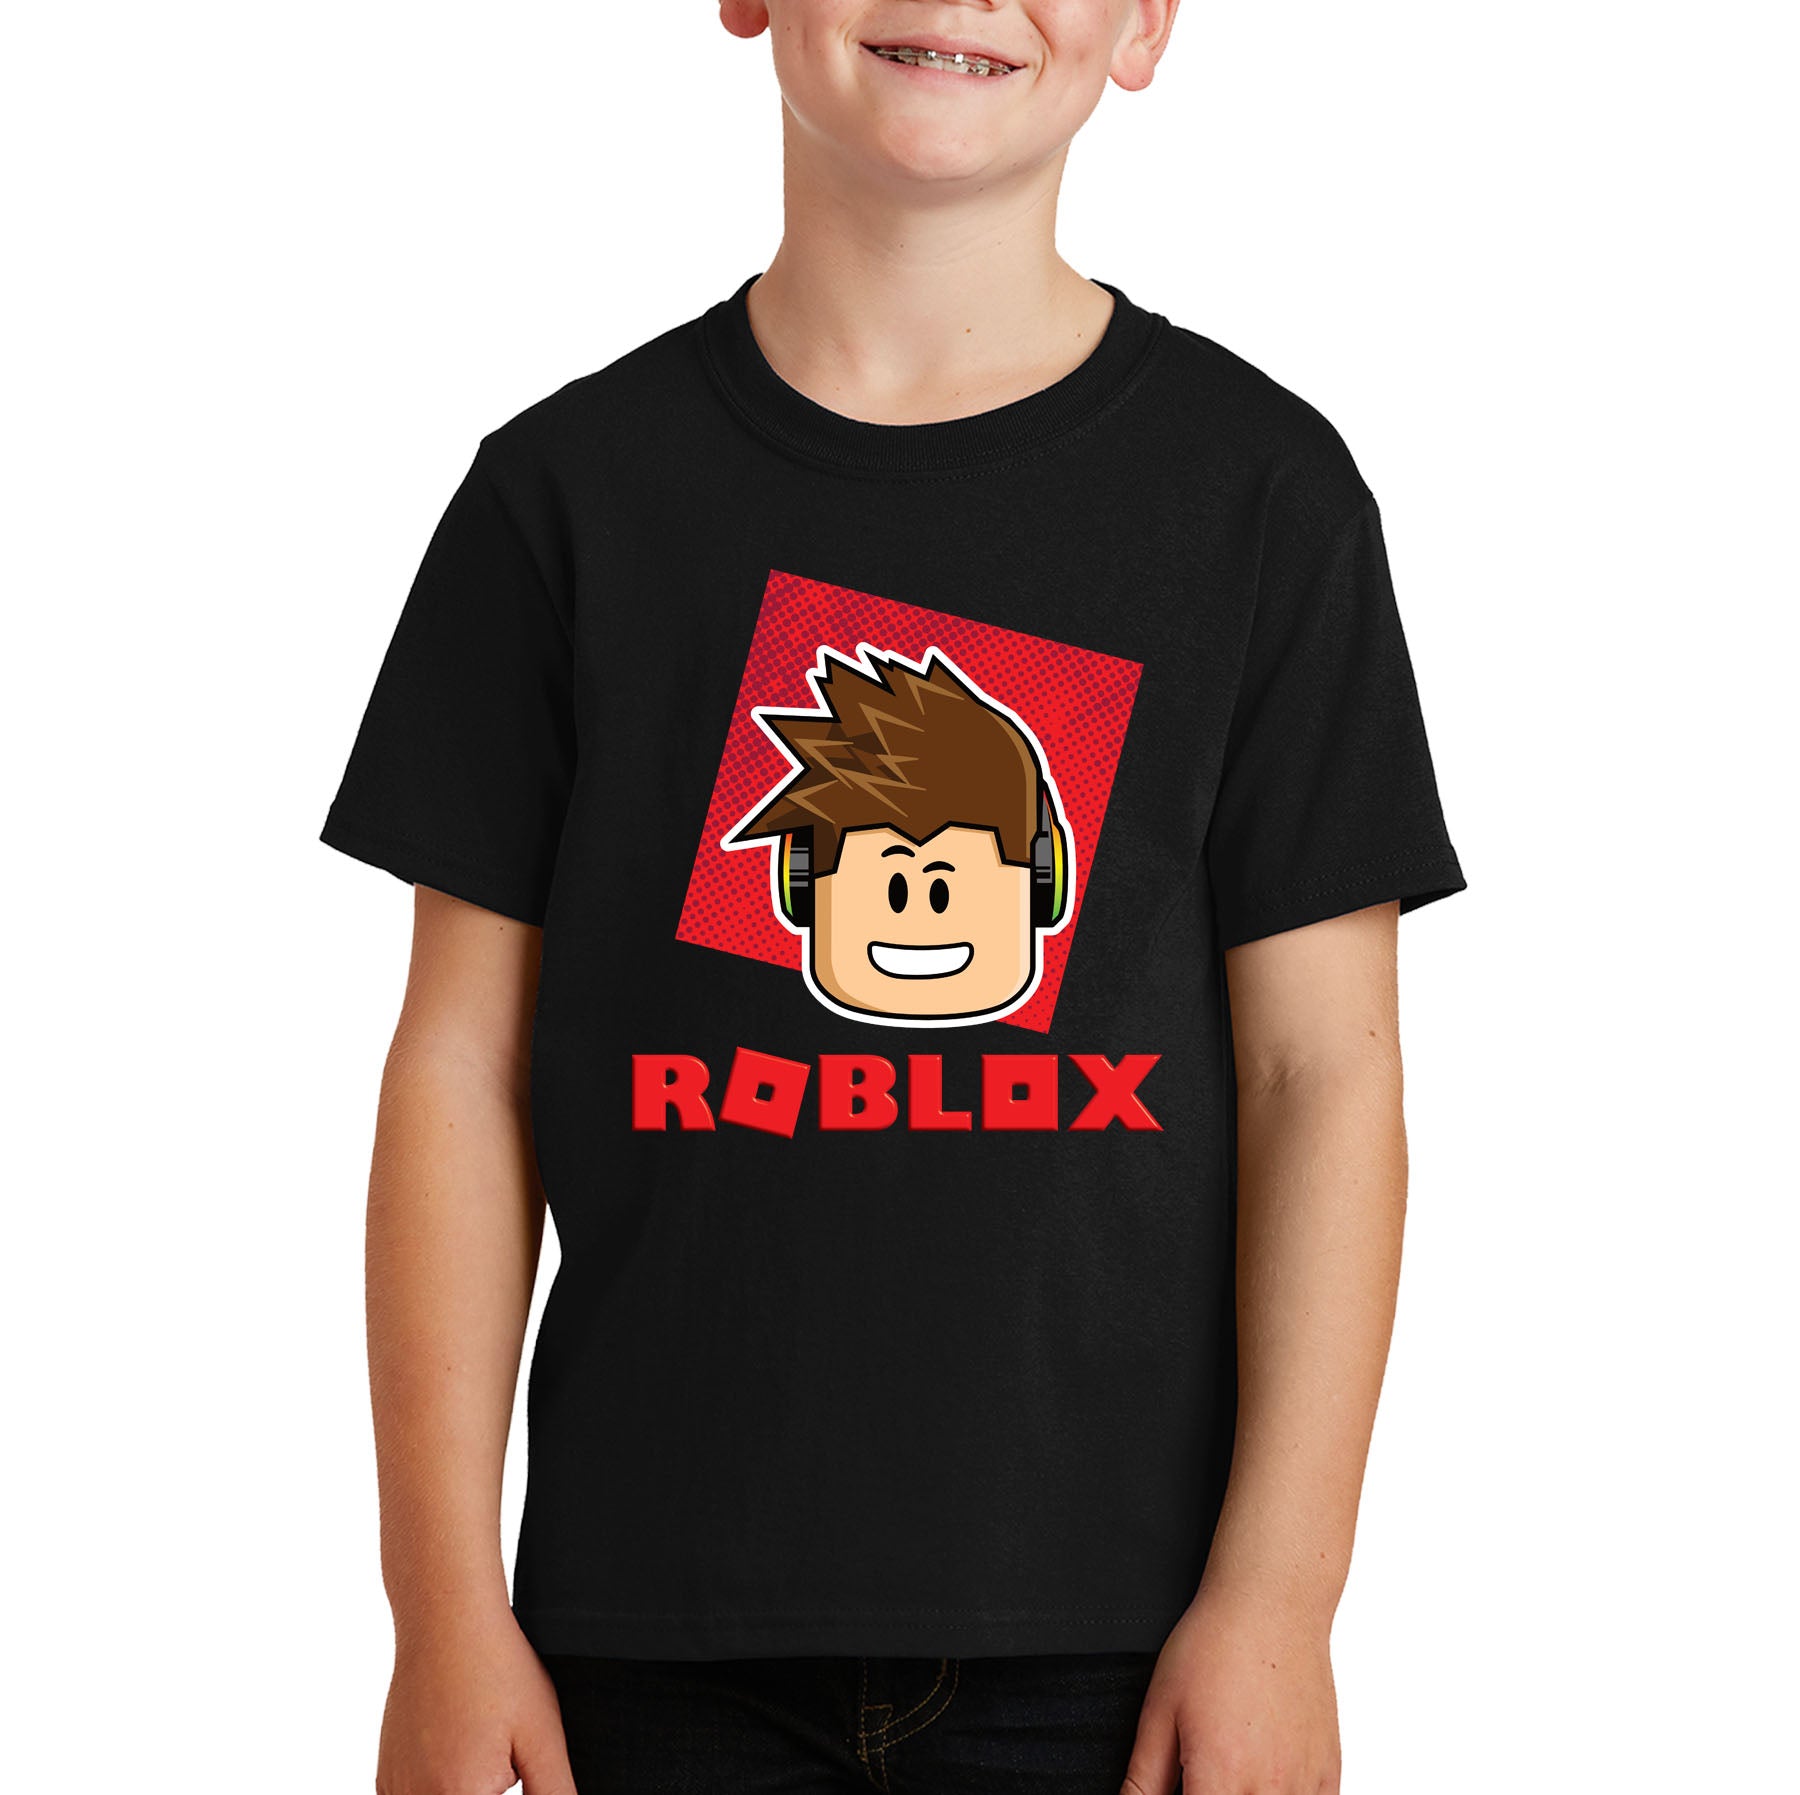 Roblox Head Kids T Shirt Fortee Apparel - details about roblox birthday t shirt personalised roblox t shirt roblox t shirt childrens